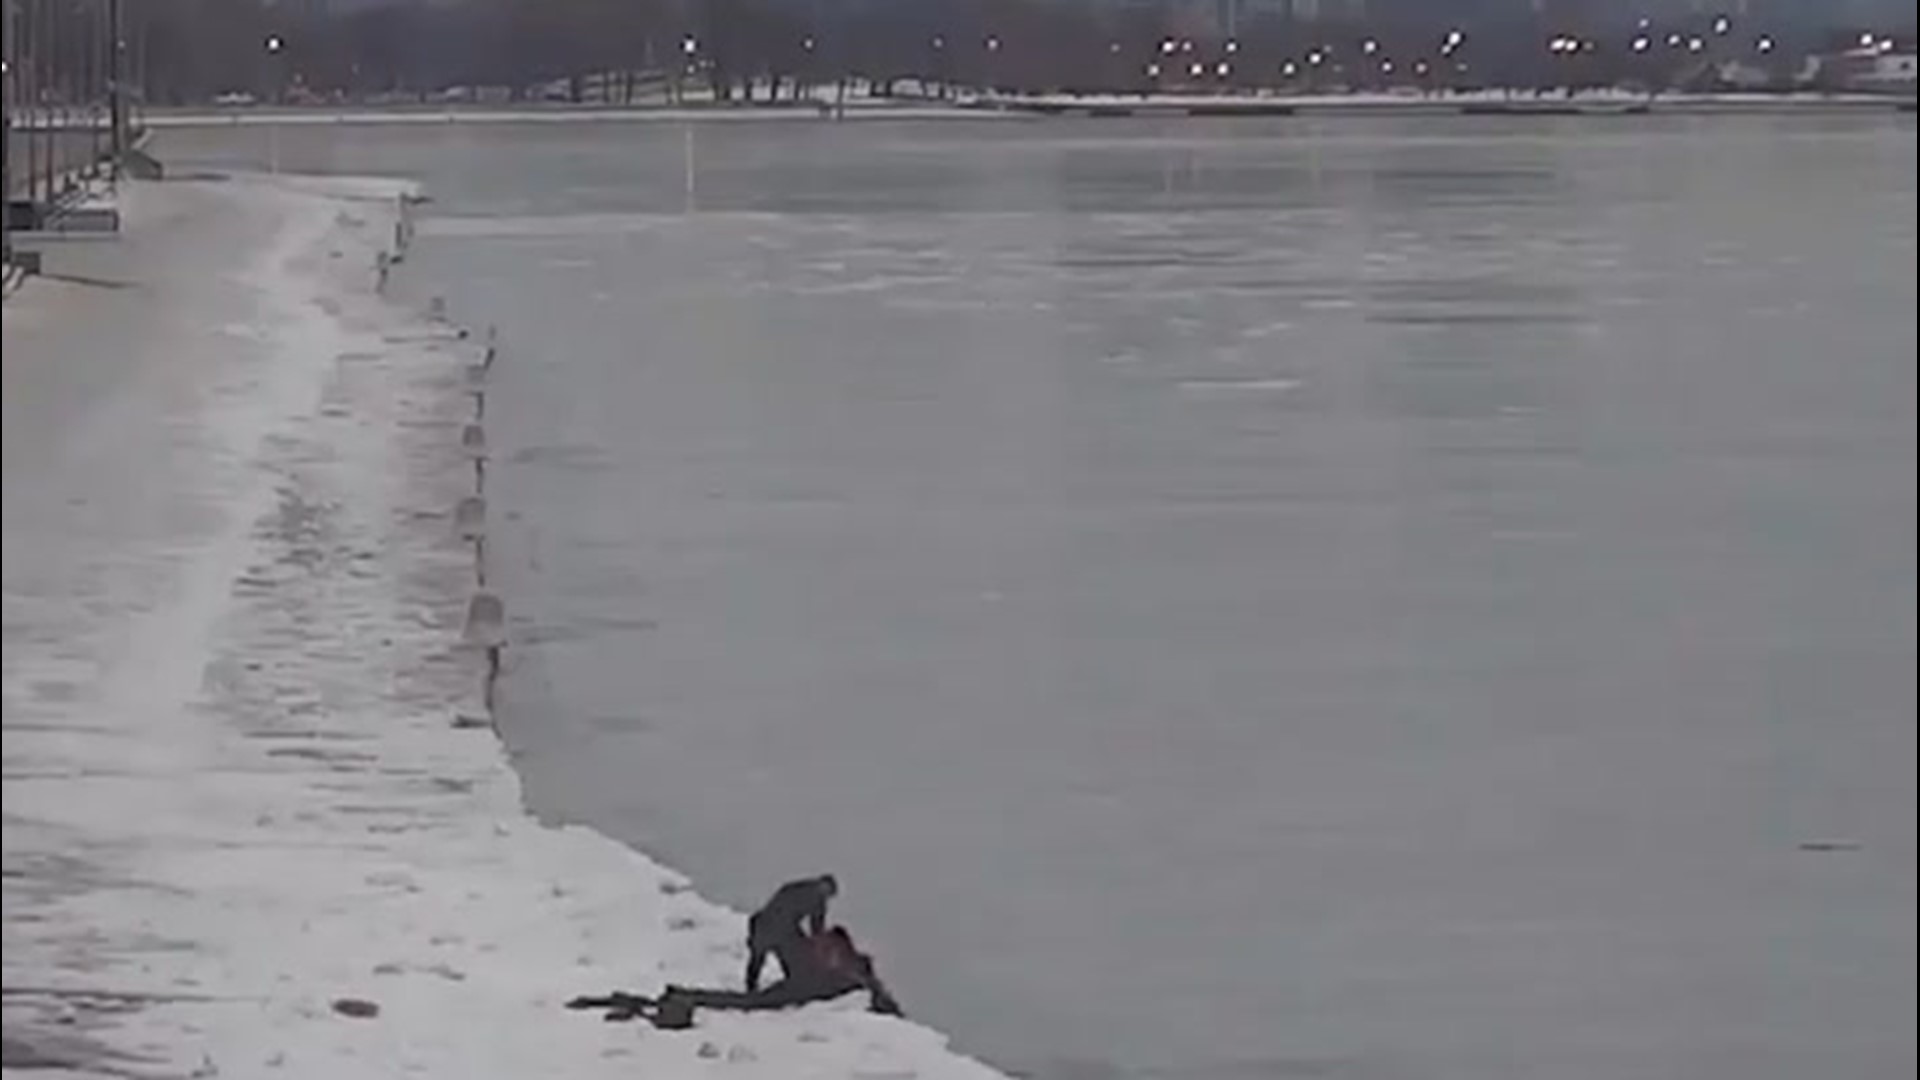 On the morning after the coldest day of the year, officers in Chicago pulled a man from the frigid waters off Lake Michigan after he had fallen in on Feb. 15.